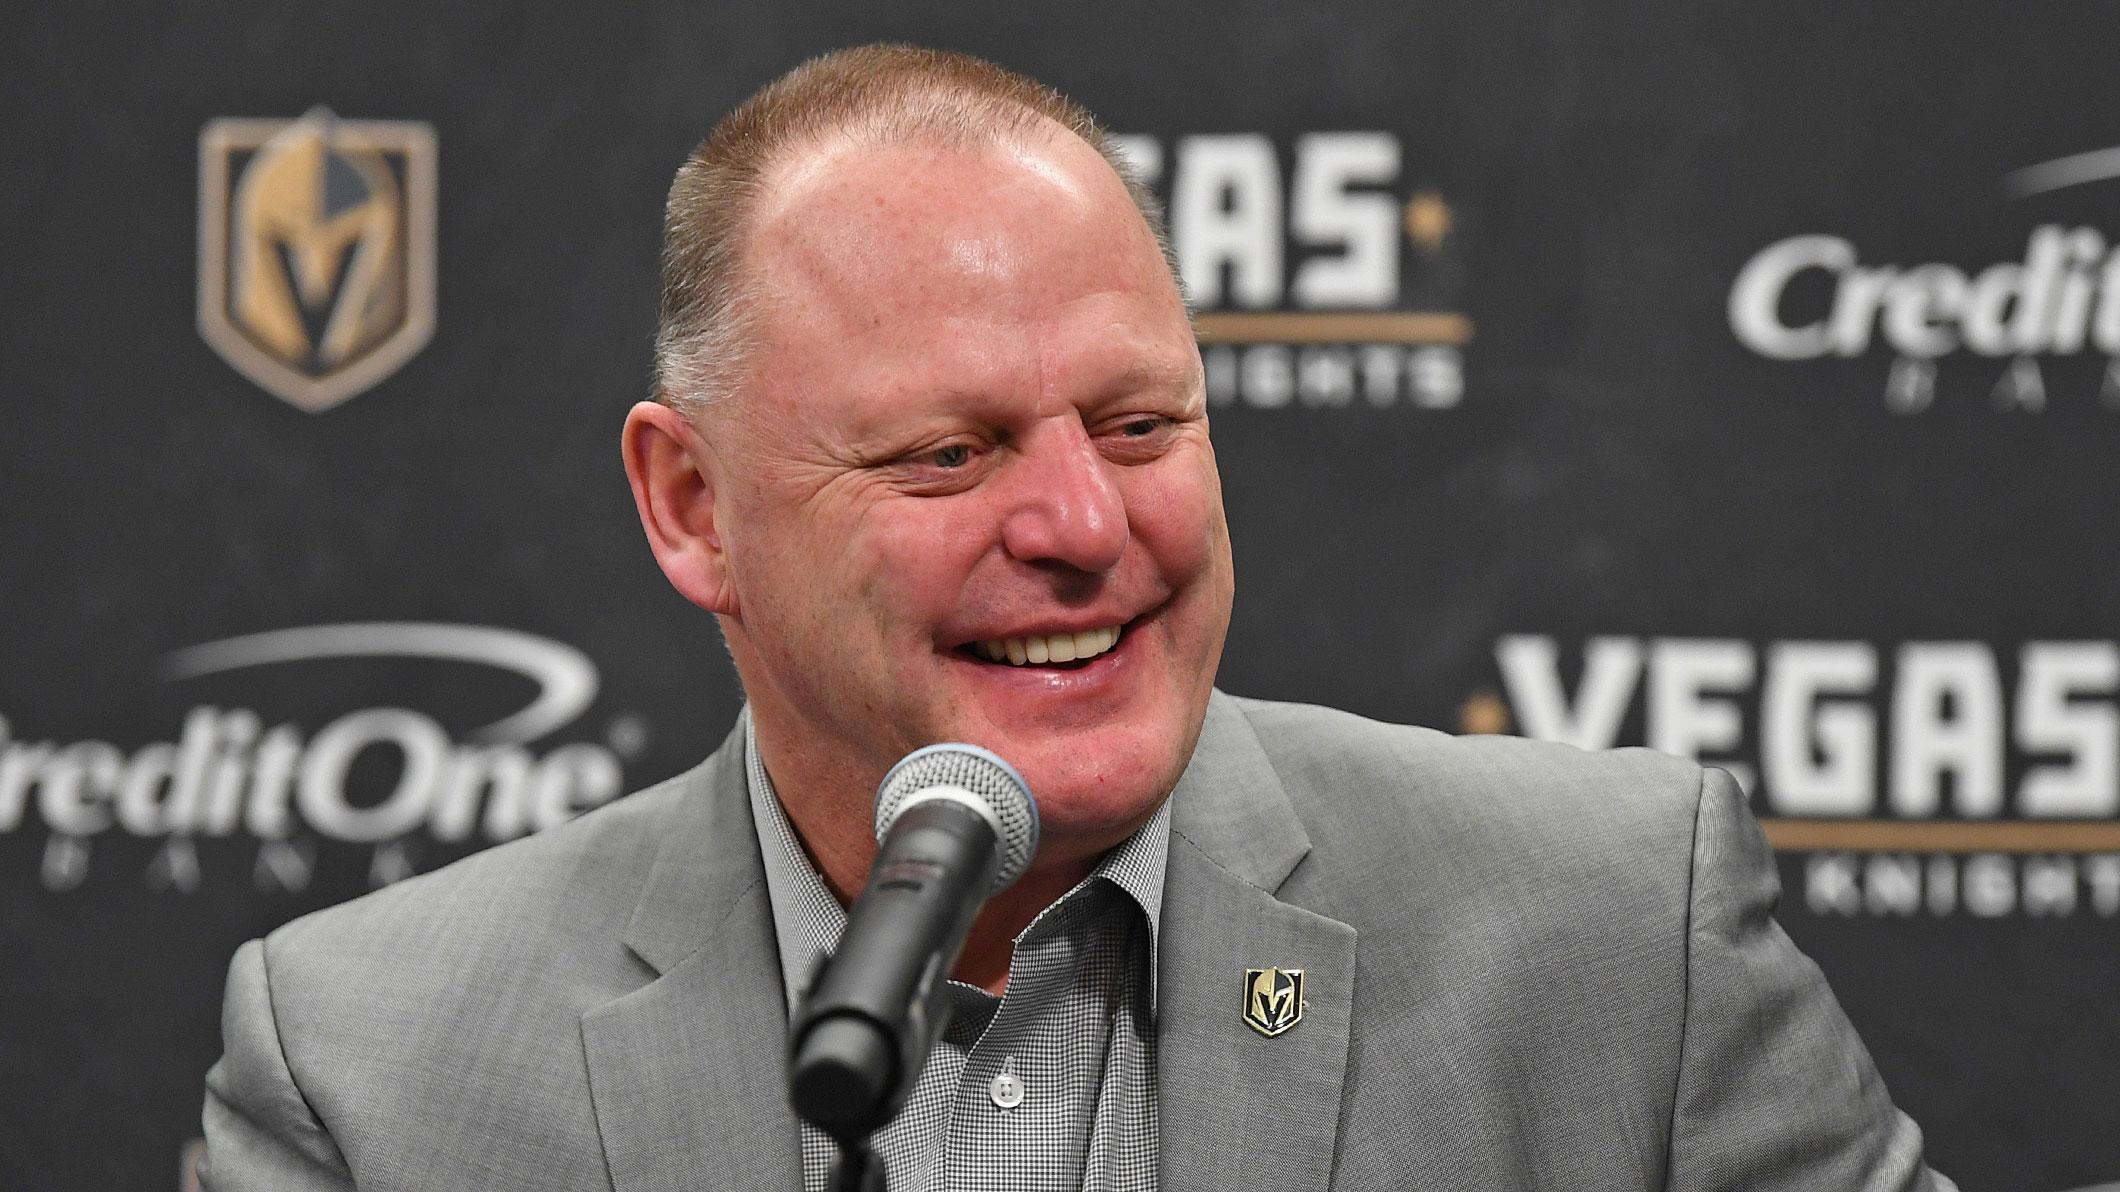 Feb 17, 2018; Las Vegas, NV, USA; Vegas Golden Knights head coach Gerard Gallant speaks with the media after the Golden Knights defeated the Montreal Canadiens at T-Mobile Arena. / Stephen R. Sylvanie-USA TODAY Sports